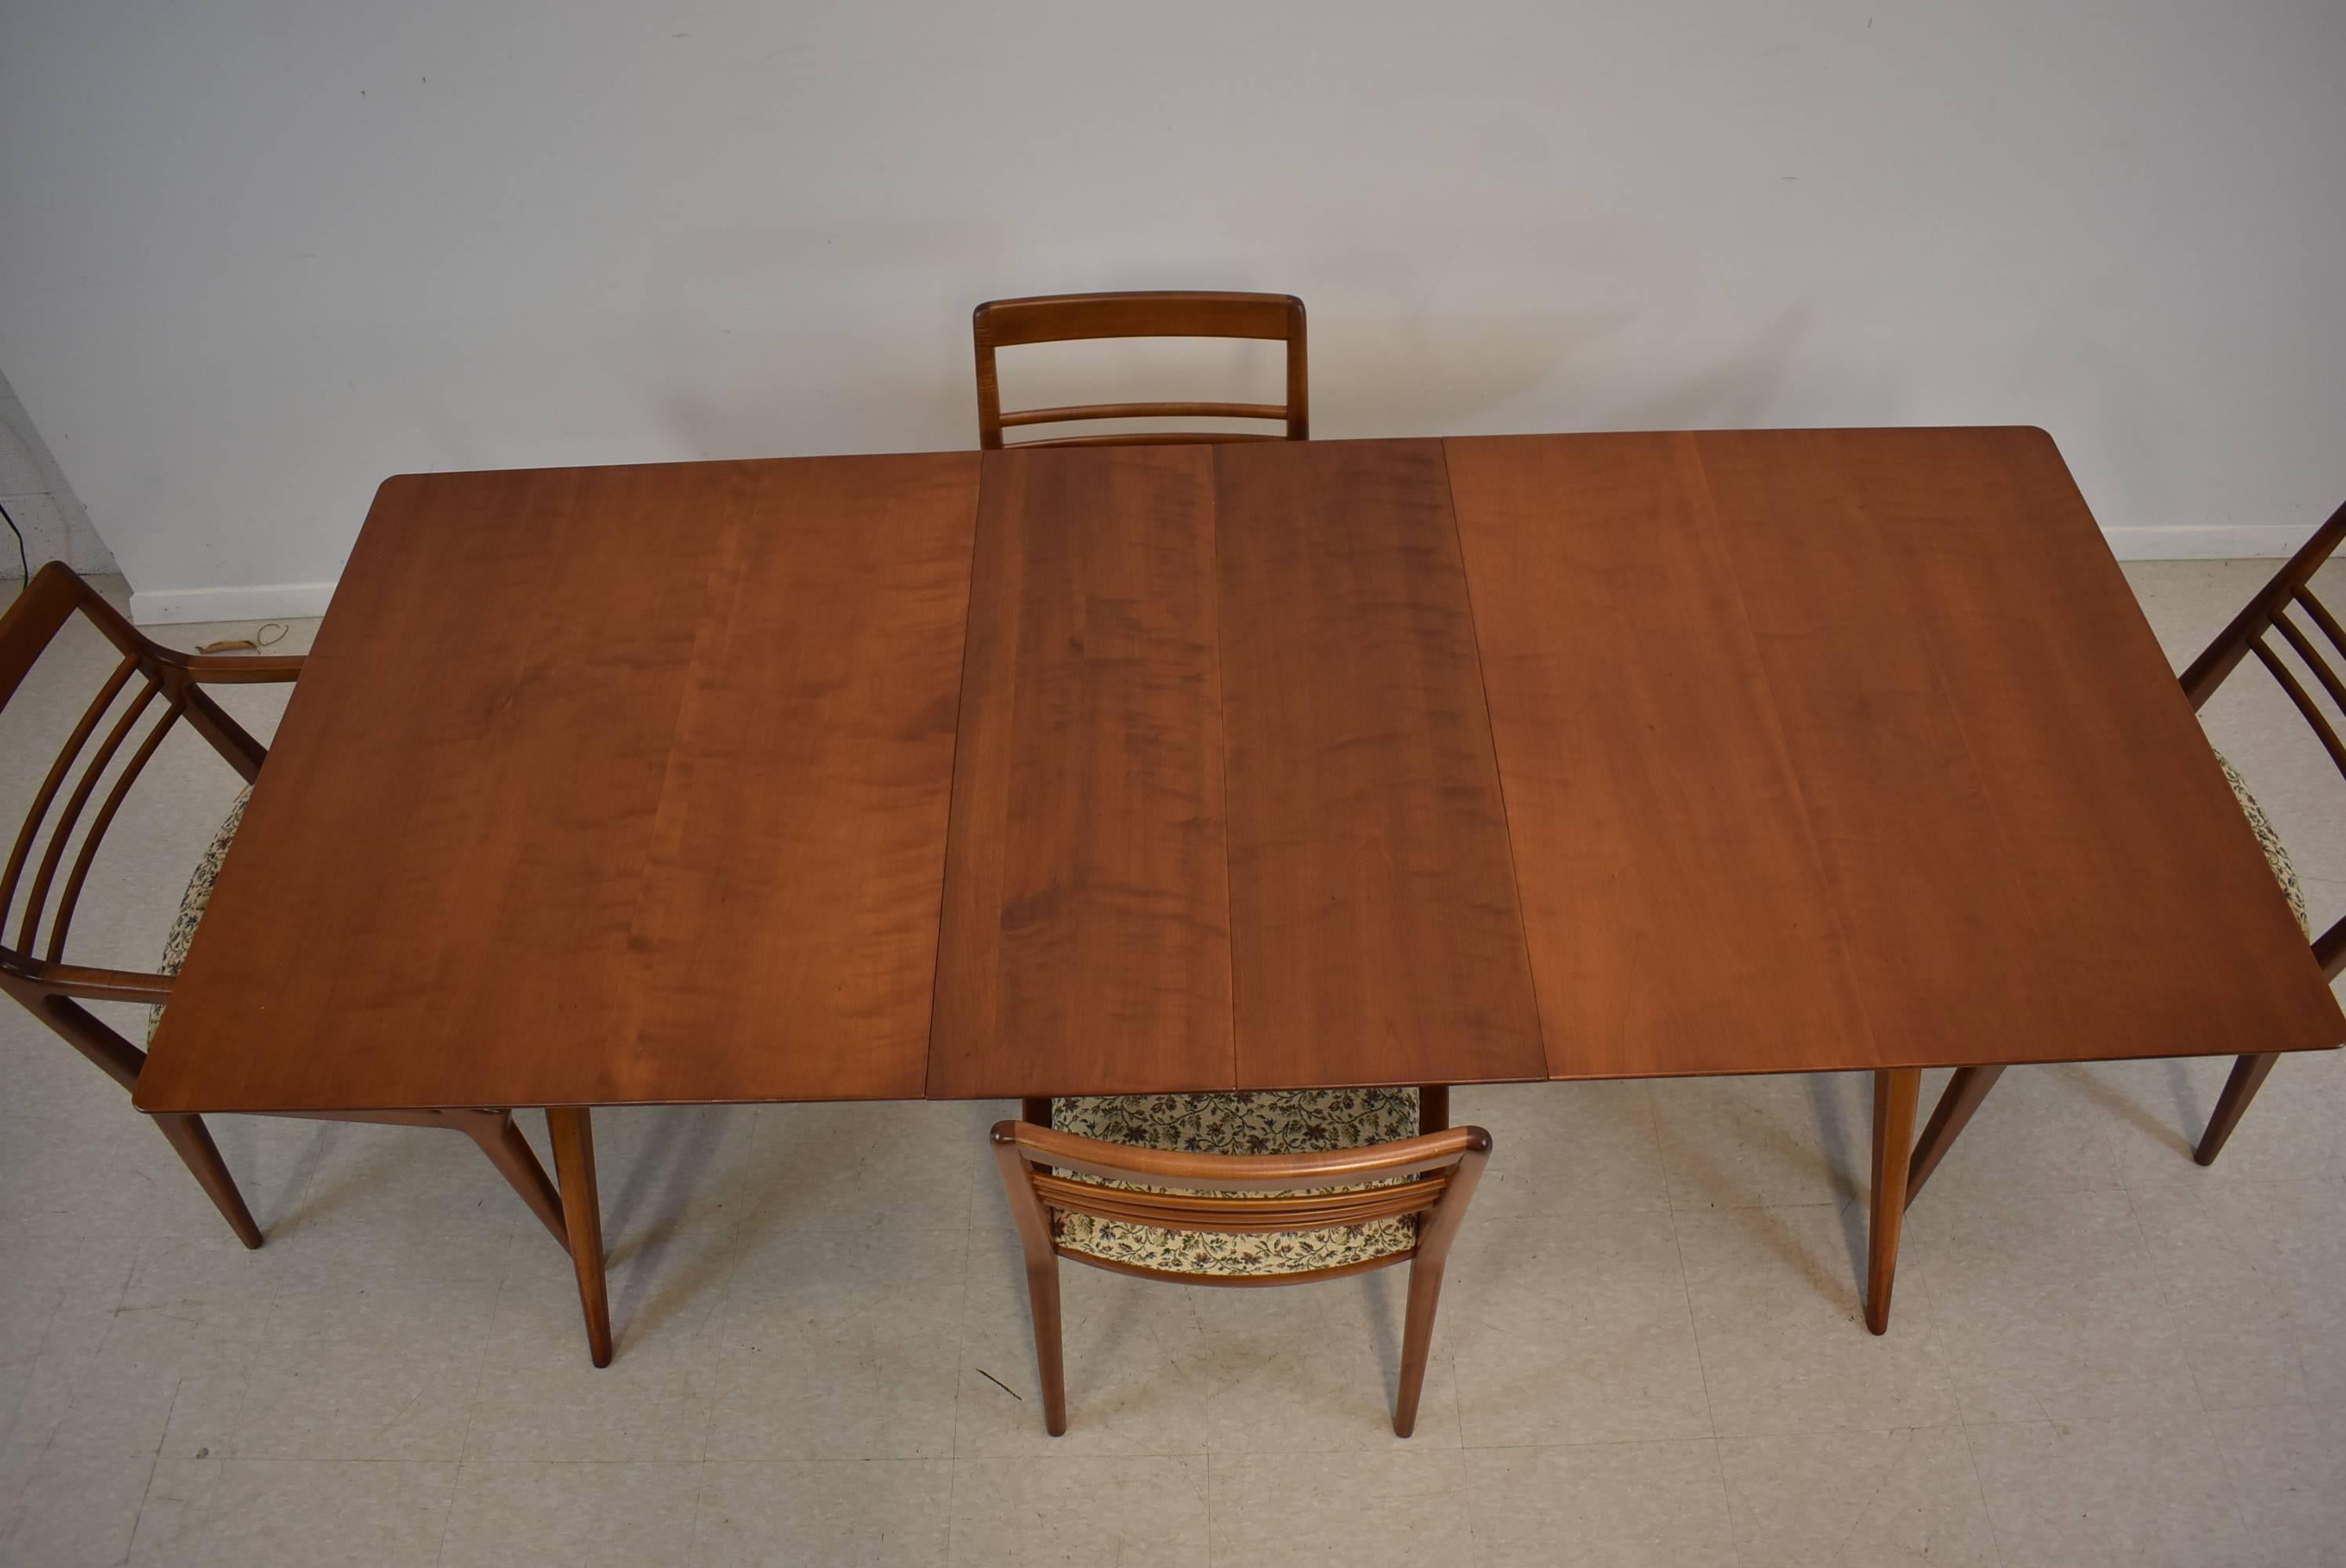 20th Century Mid-Century Modern Dining Room Table and Four Chairs, Johnson Furniture Company